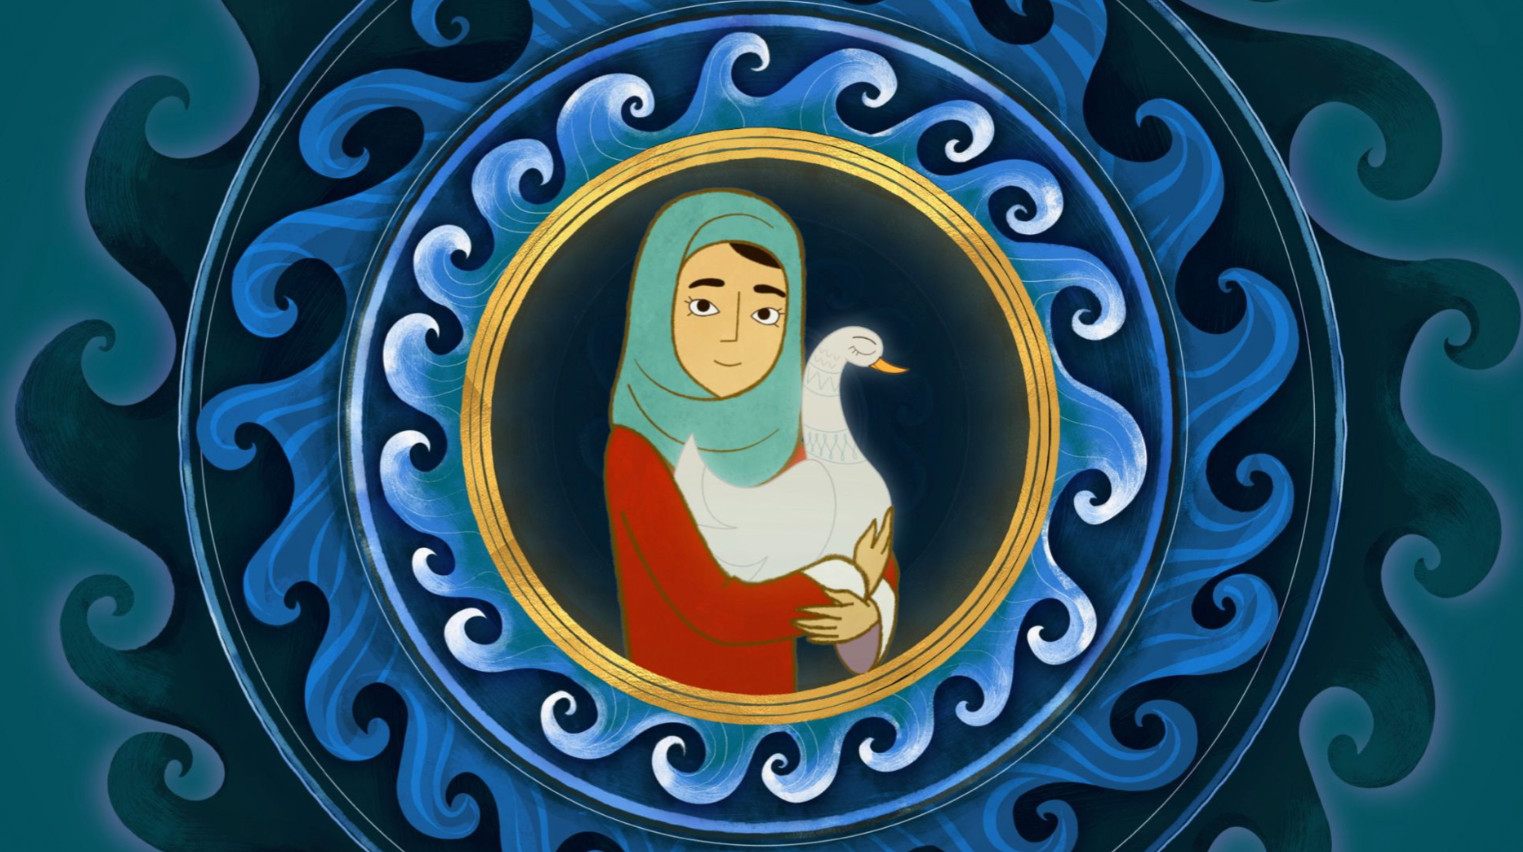 Huda razzak’s oscar® qualified animated short the ocean duck a timeless story bringing to life a family’s ancient tale